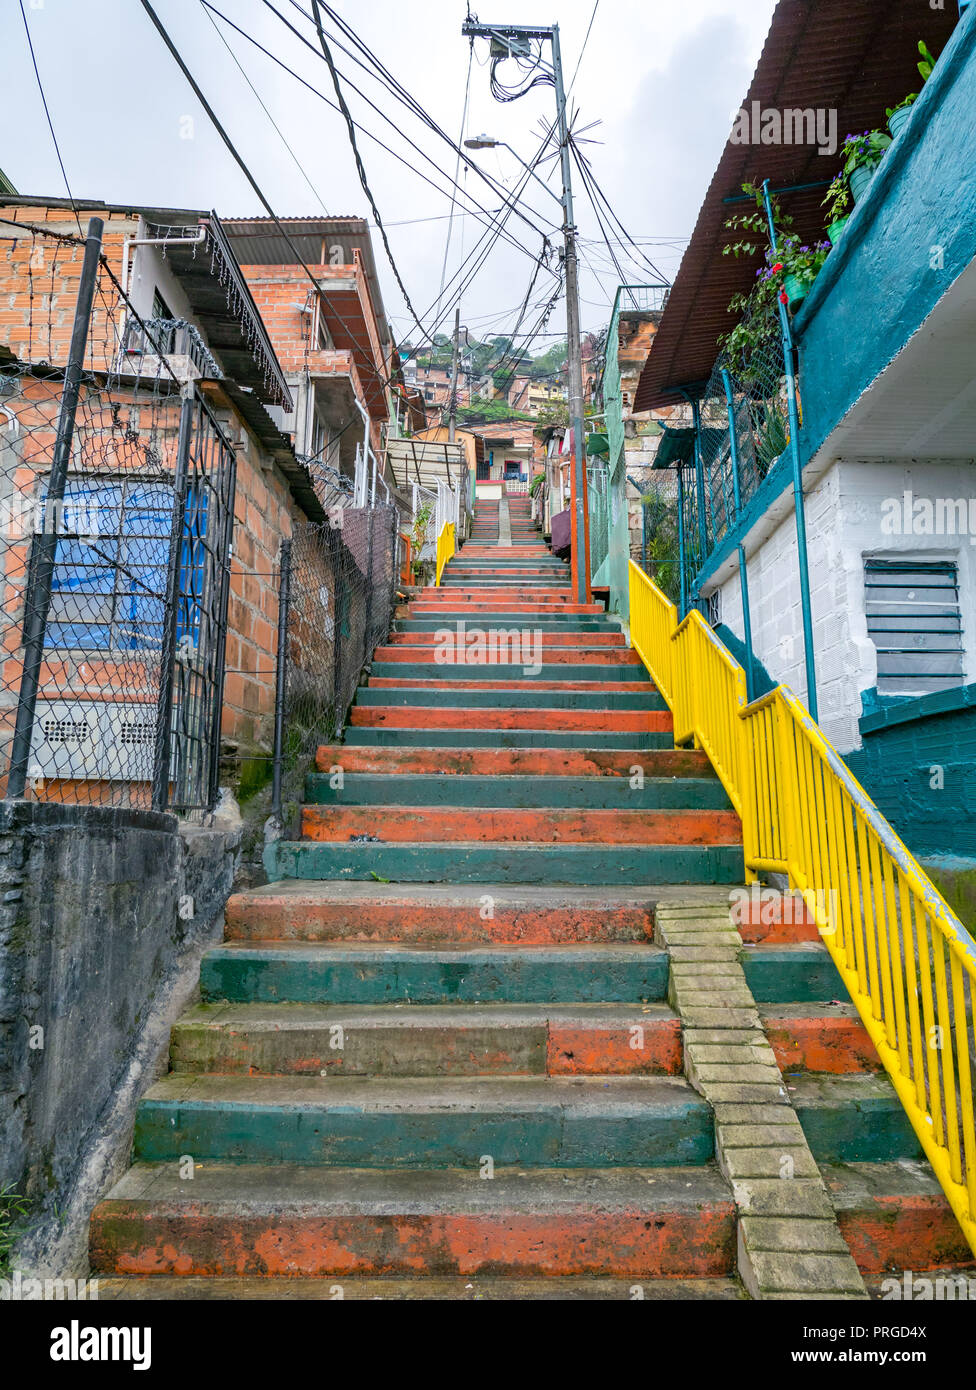 Stairs in a poor neighborhood in Medellin, Colombia Stock Photo